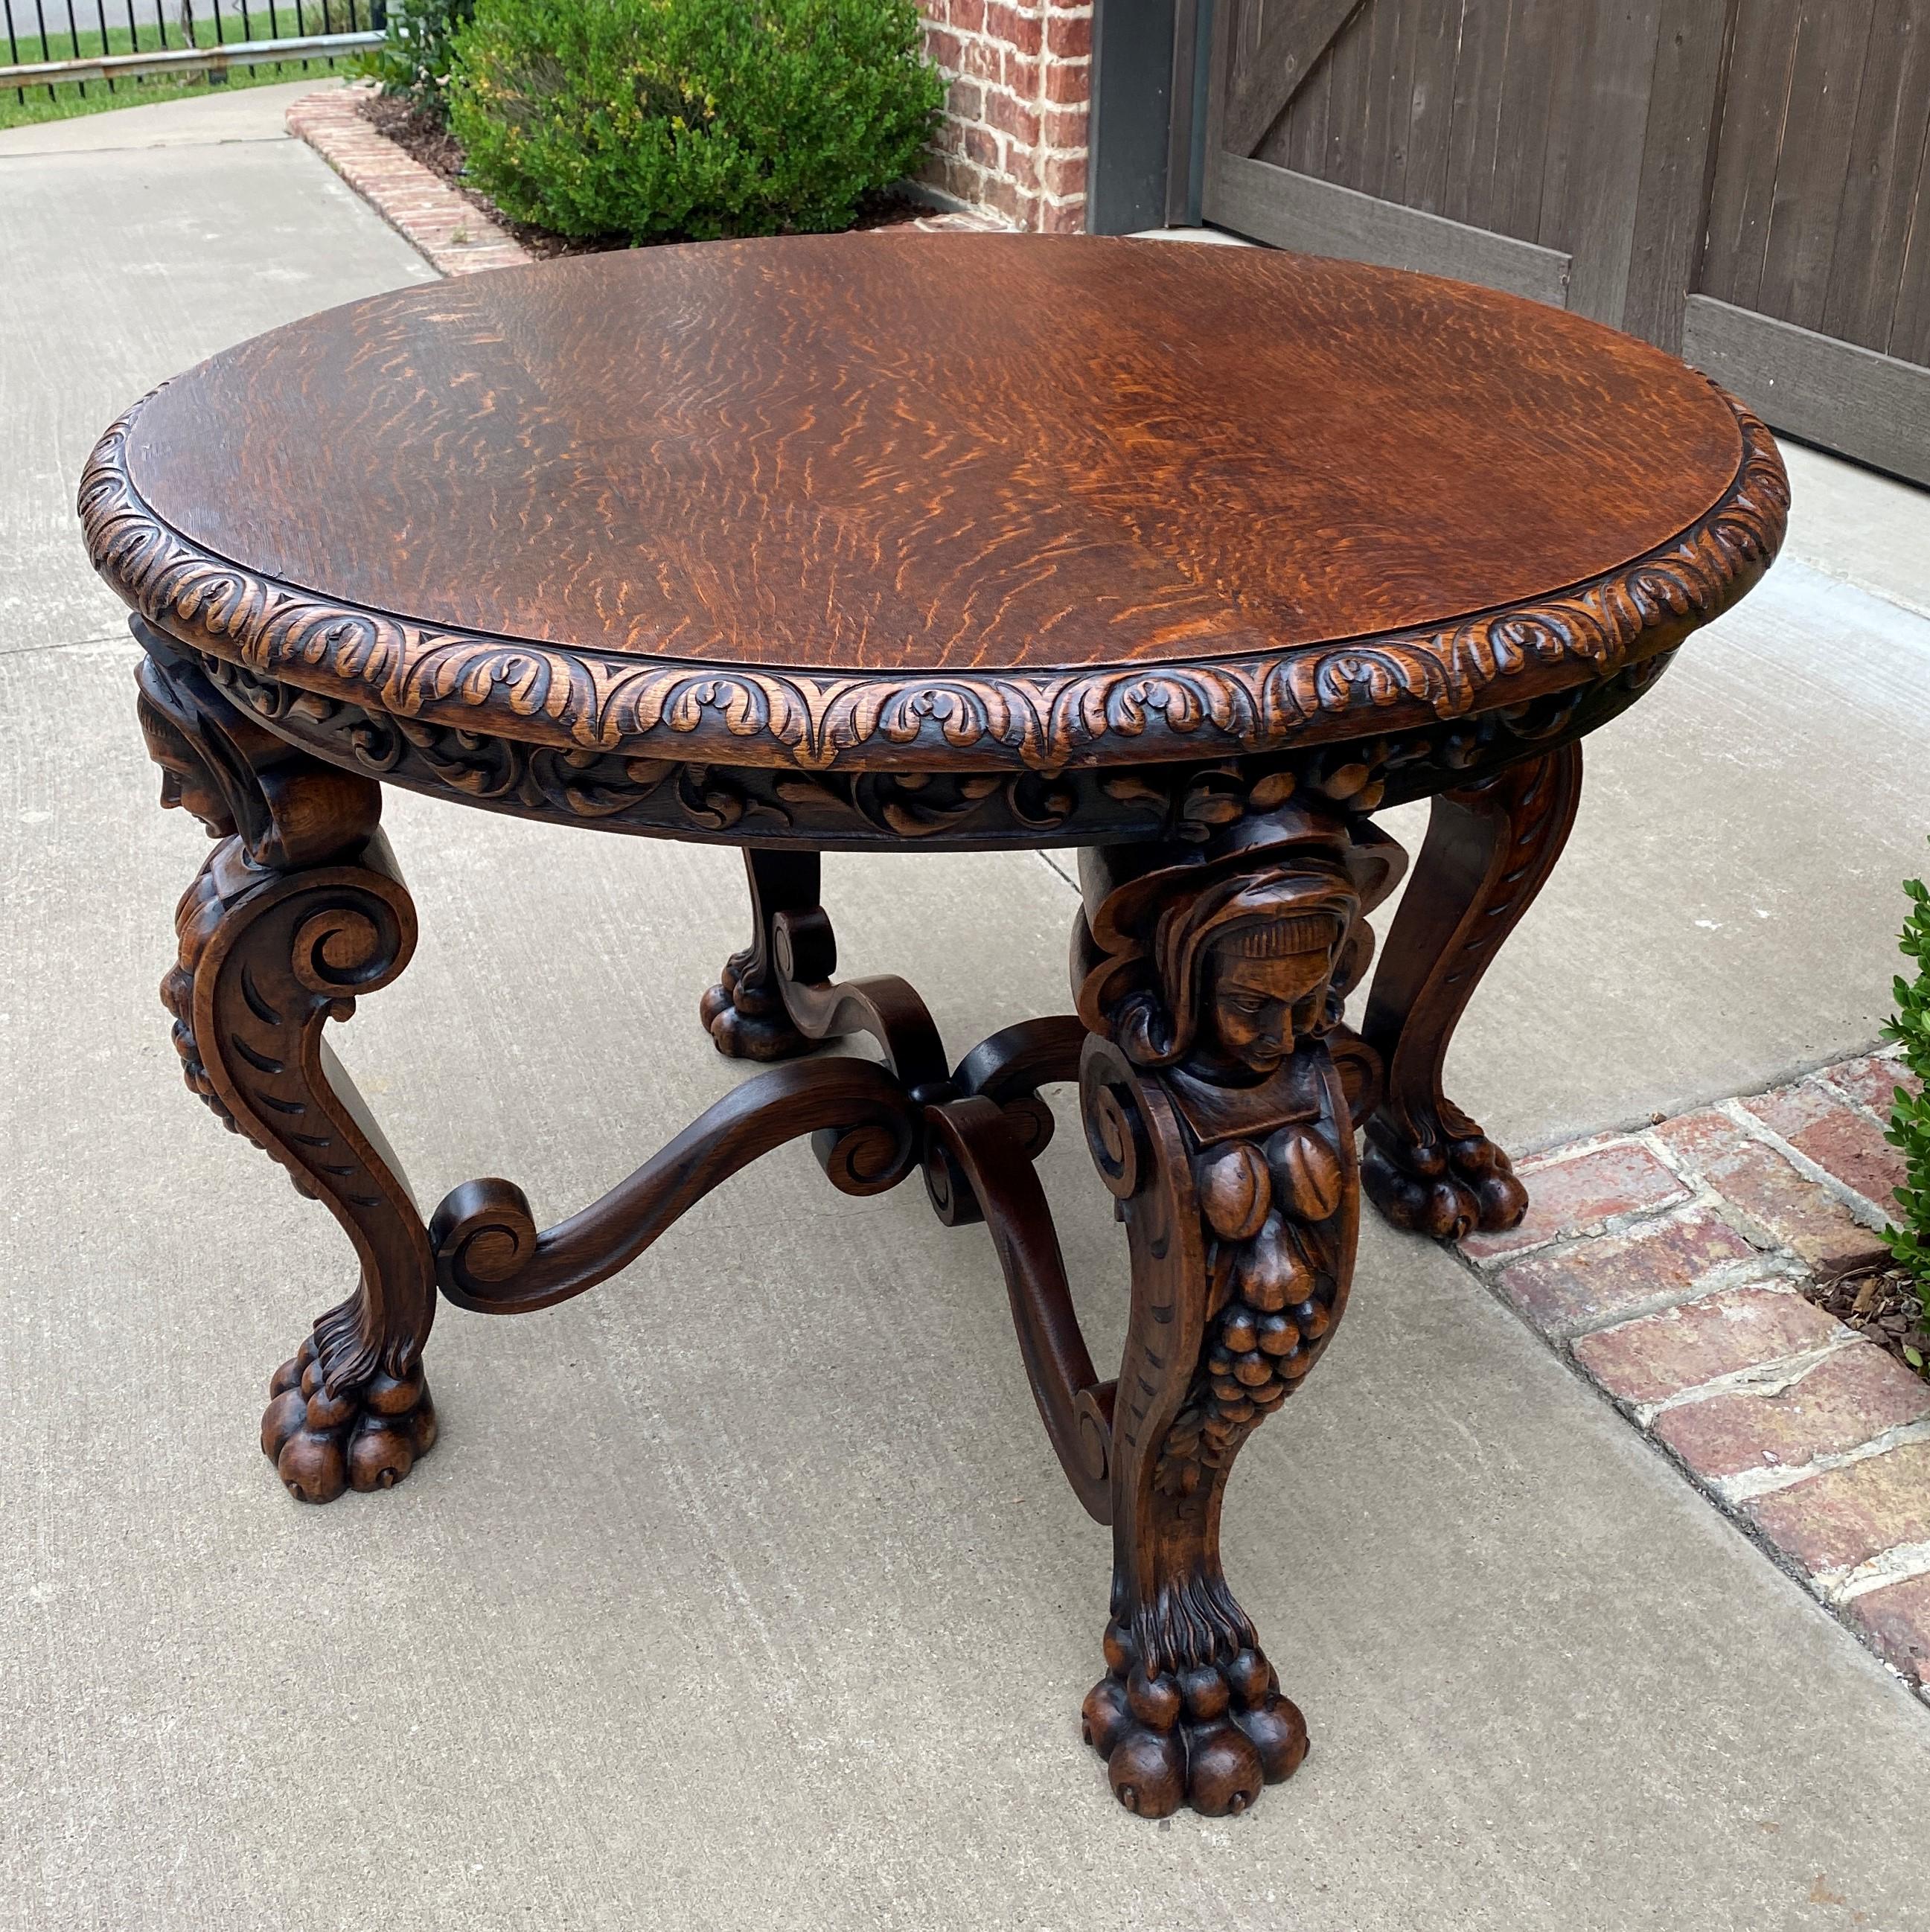 Antique French Round Table Entry Sofa Foyer Coffee Table Renaissance Revival Oak For Sale 5